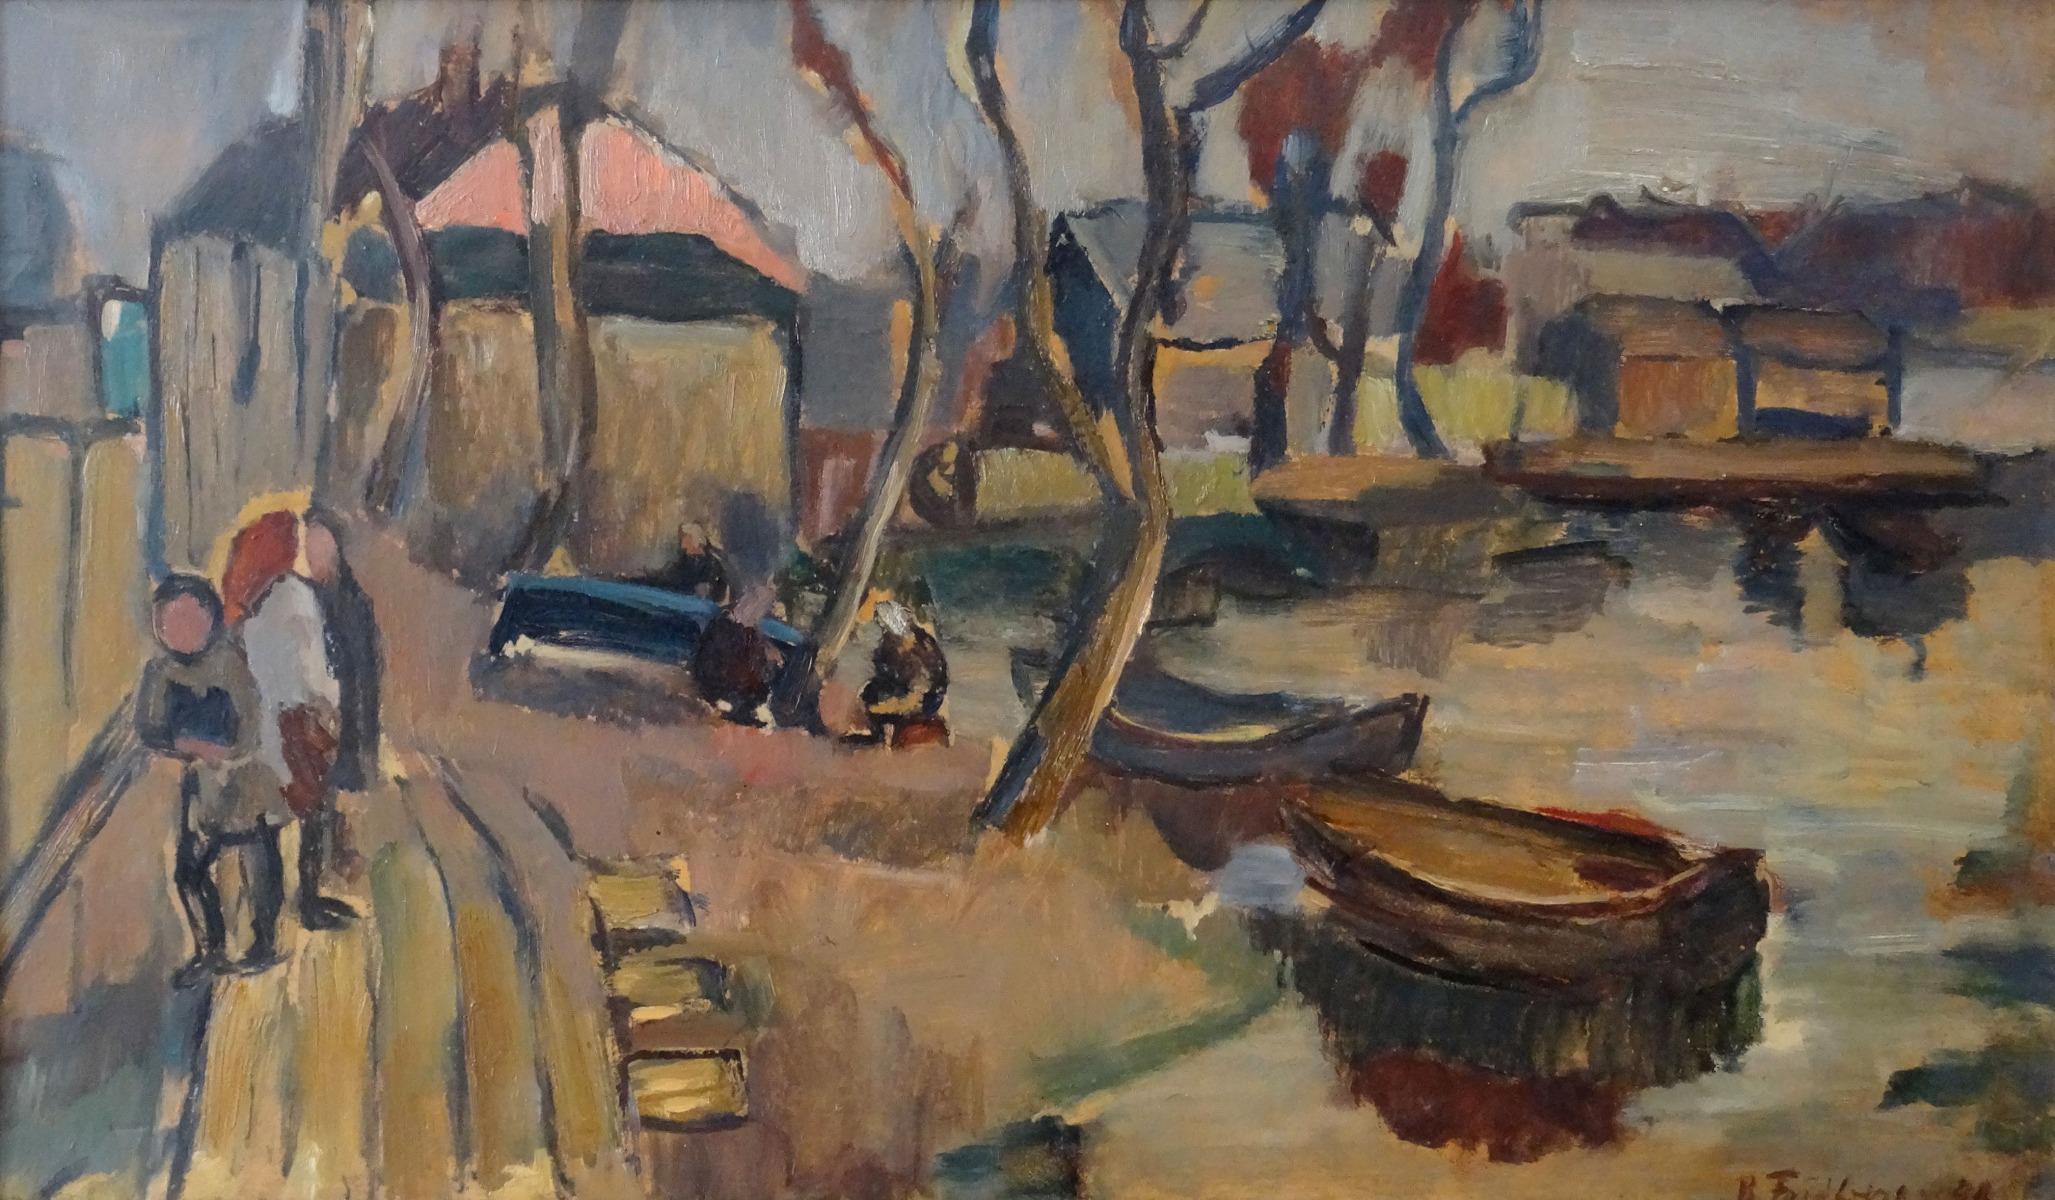 Boats by the river  Oil on cardboard, 47.5x80 cm